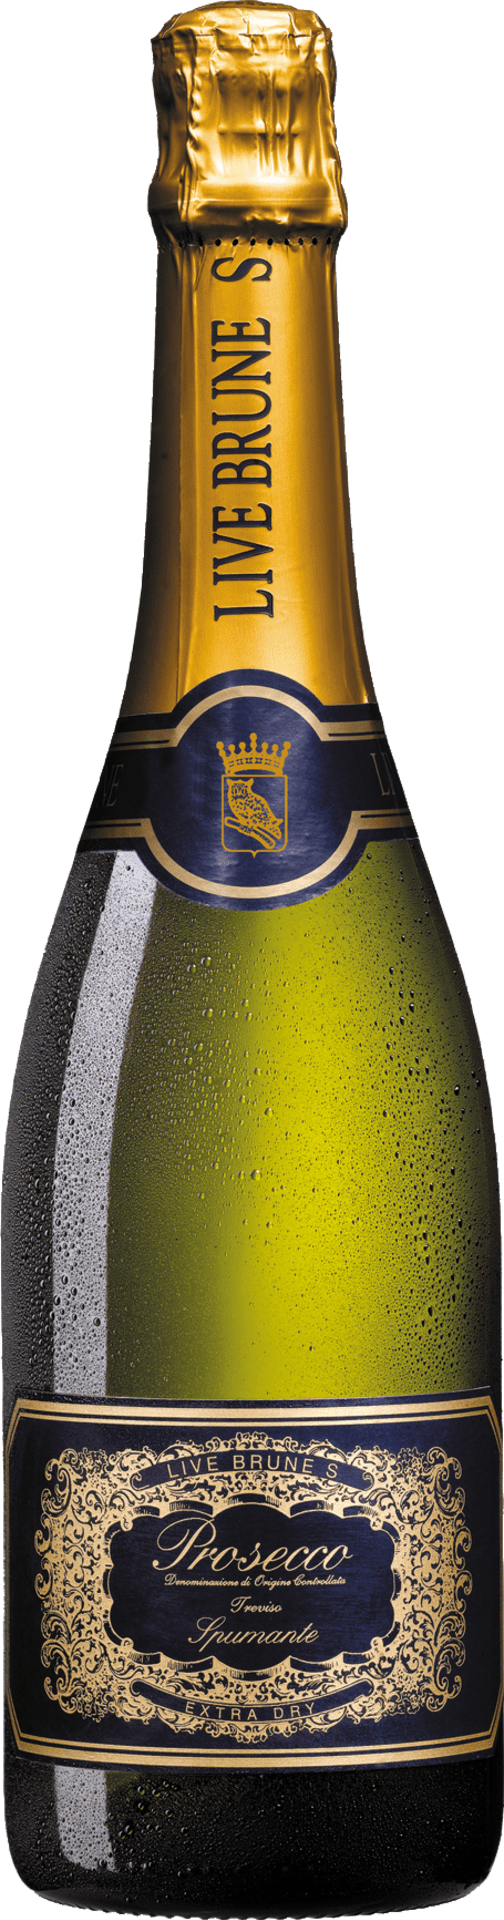 "Live Brune S" Extra Dry Prosecco DOC